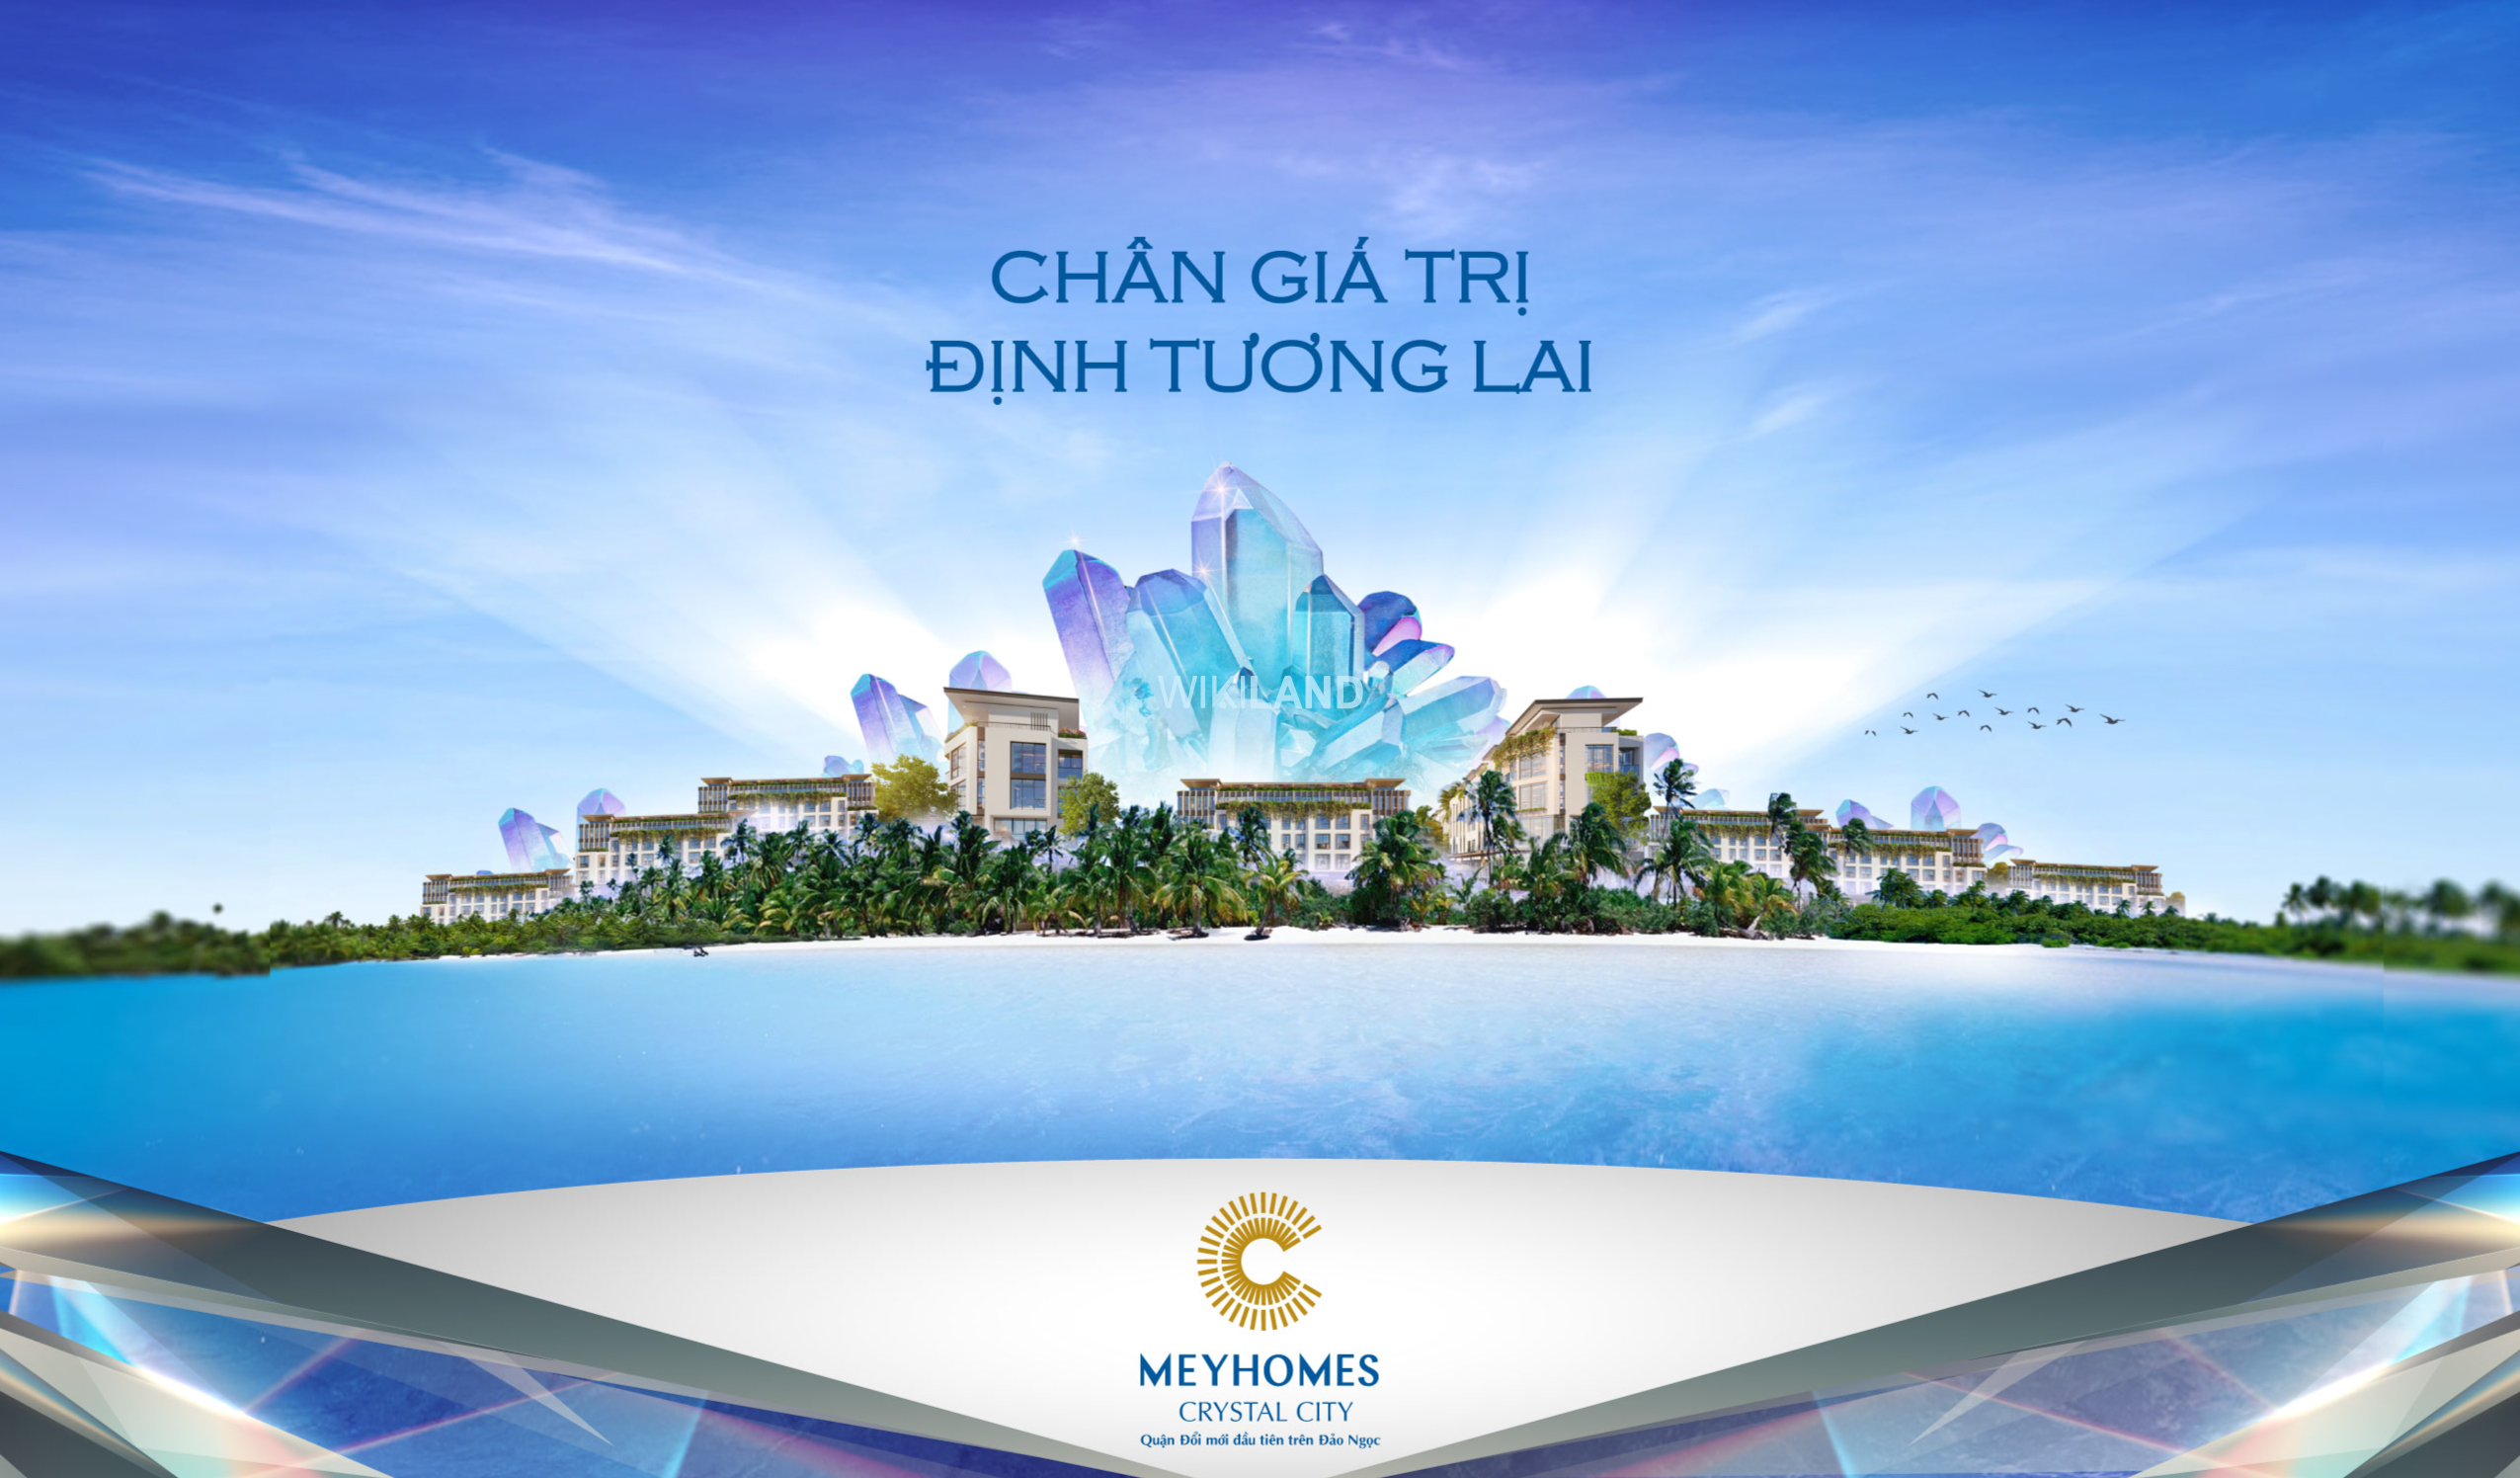 Crystal city meyhomes capital 7 wikiland. Vn